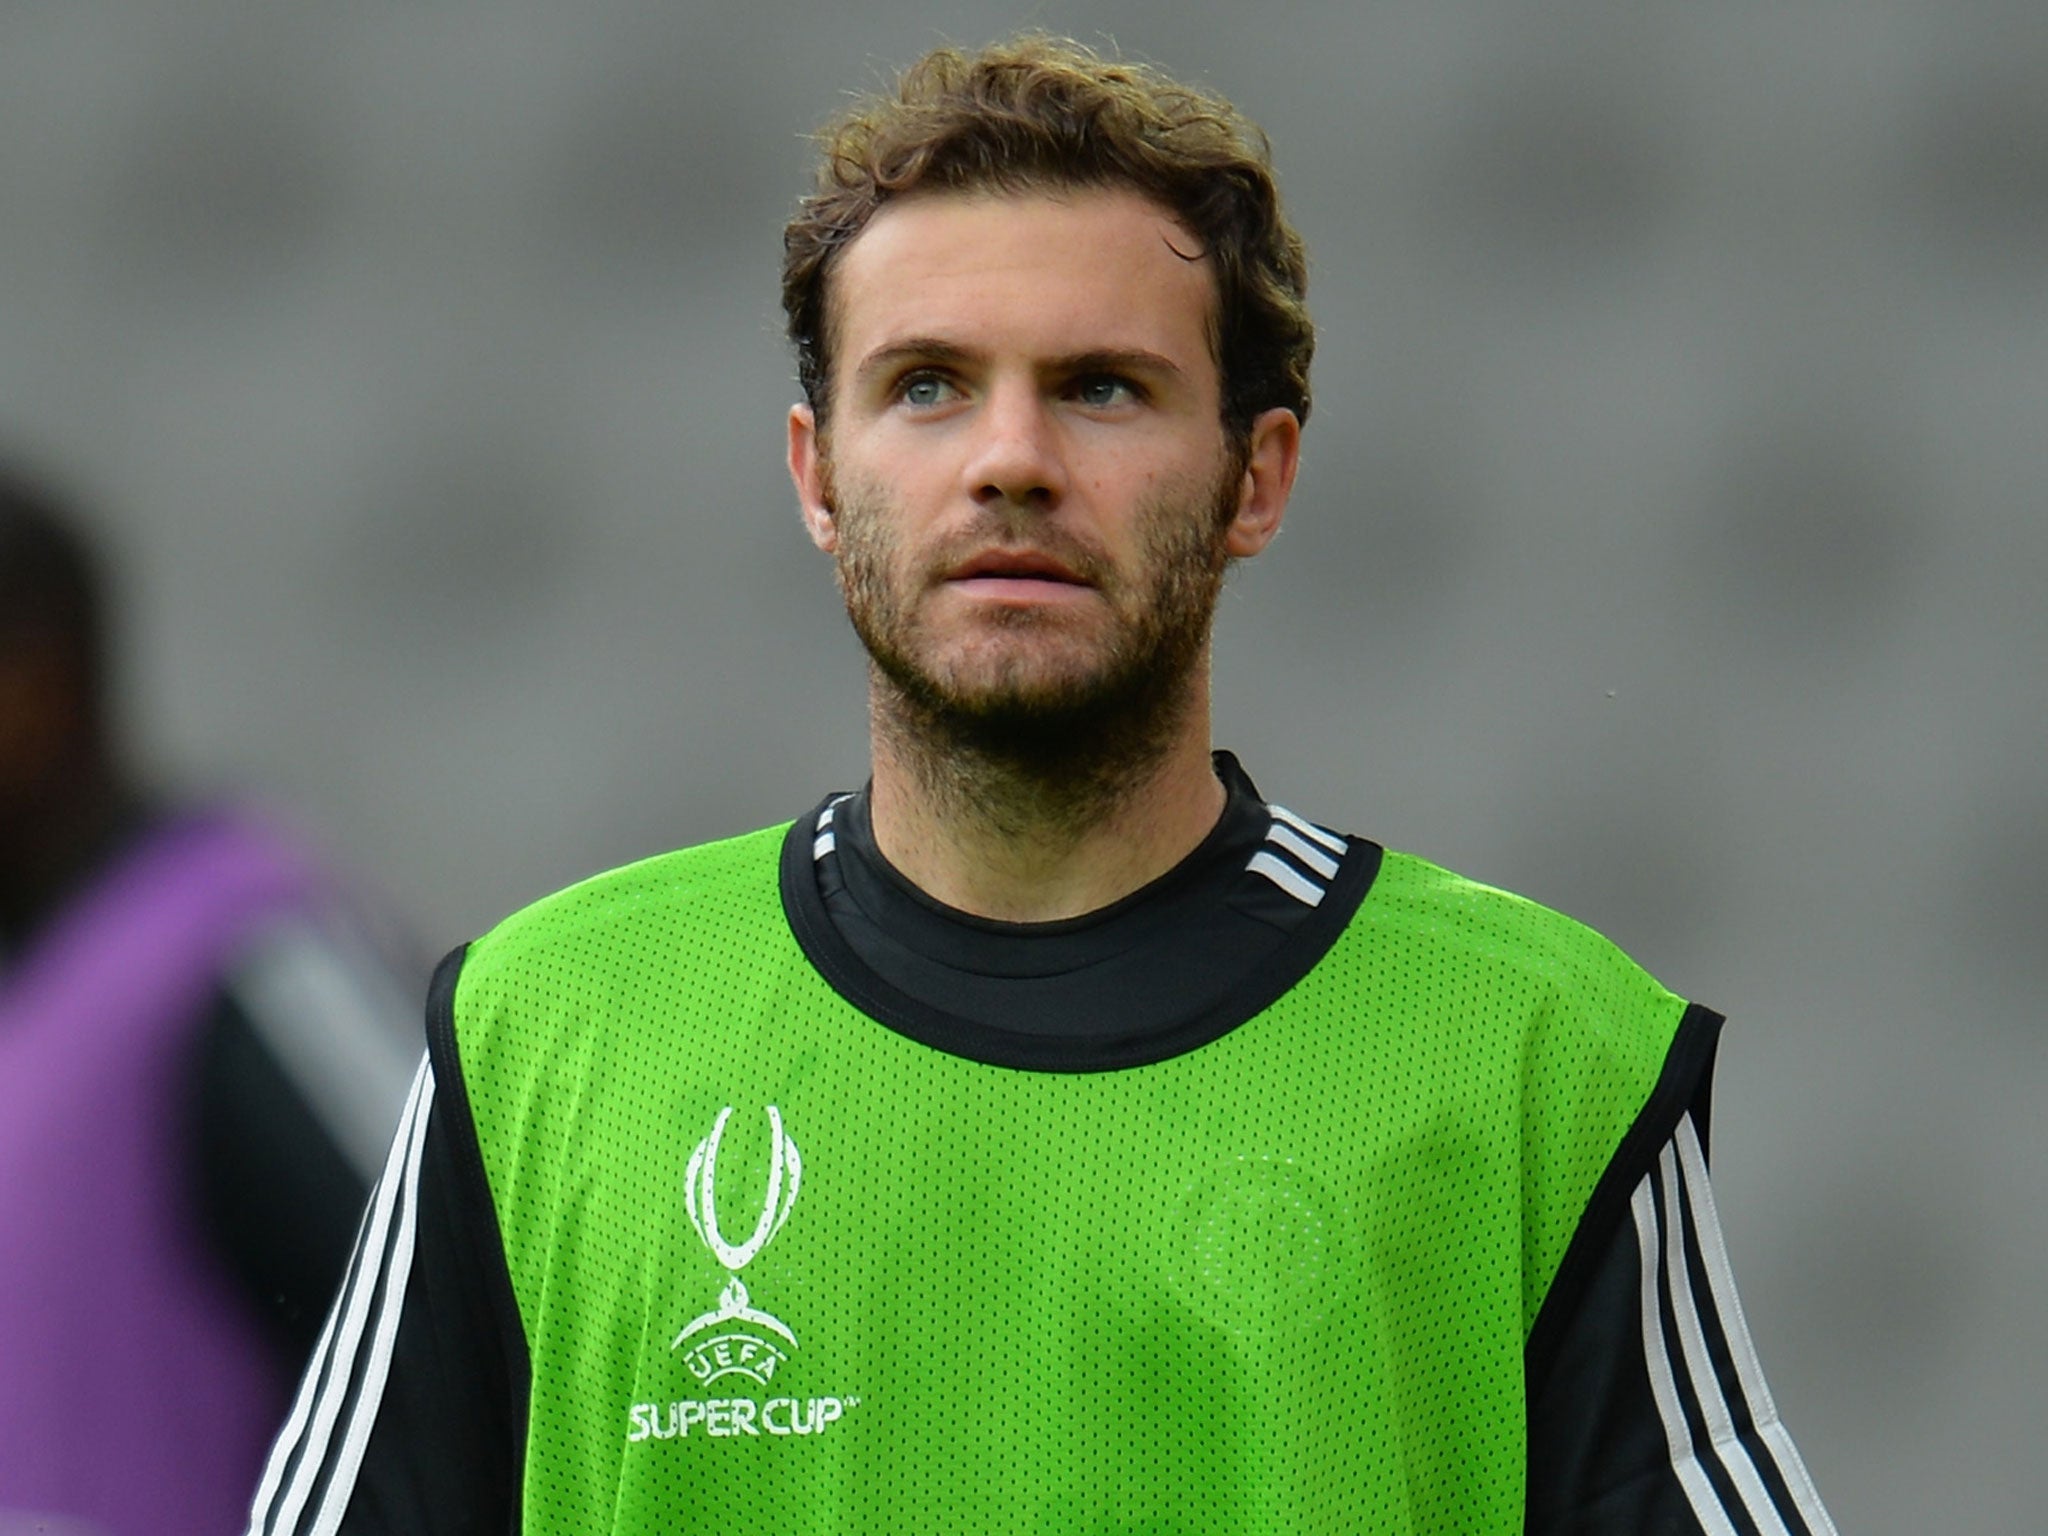 Juan Mata could be set for a rare Chelsea start against Arsenal